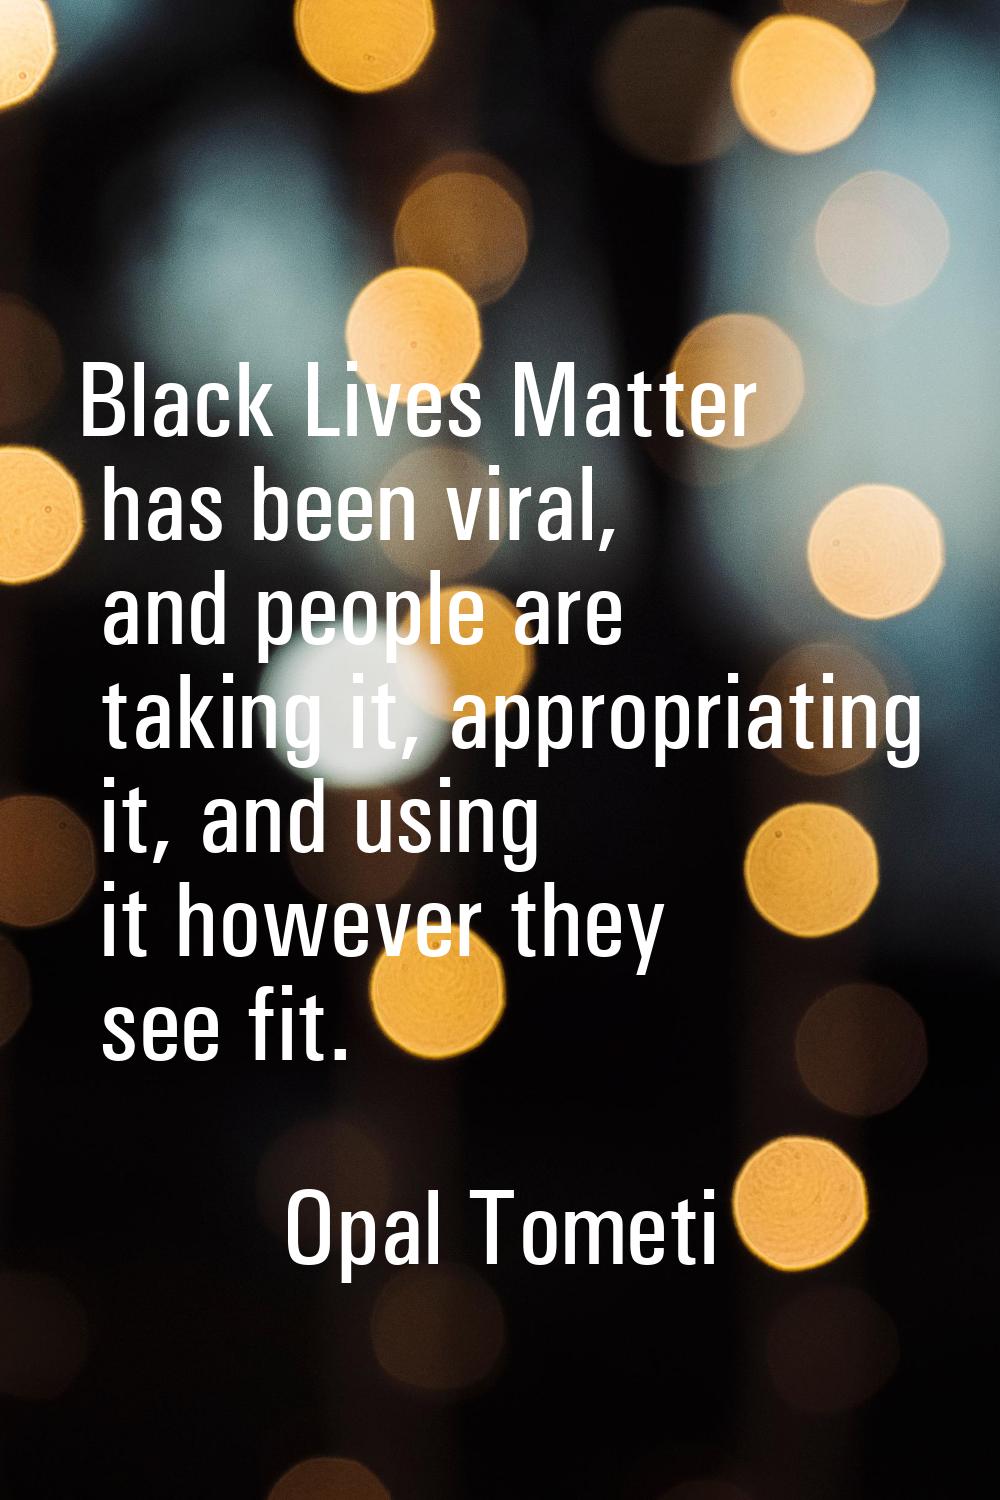 Black Lives Matter has been viral, and people are taking it, appropriating it, and using it however